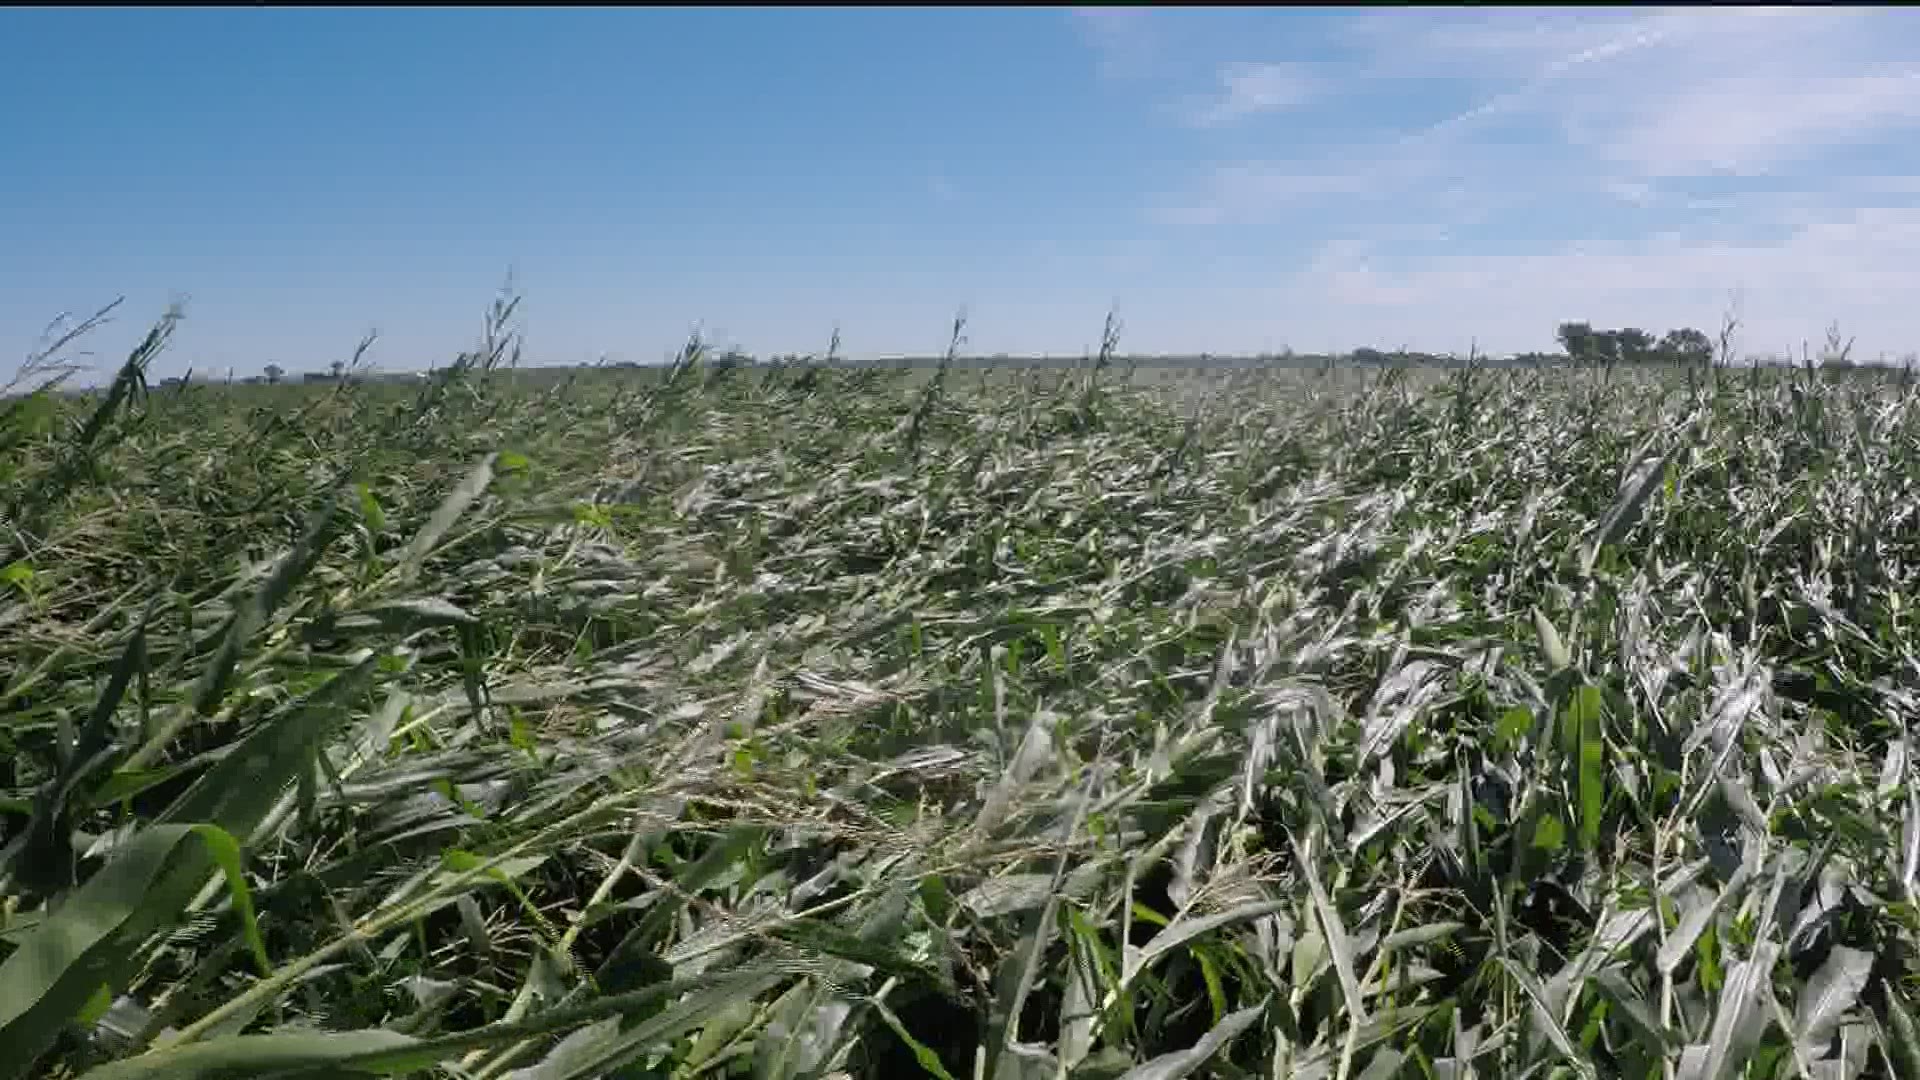 Wind damage flattened corn to the ground in some fields around the state